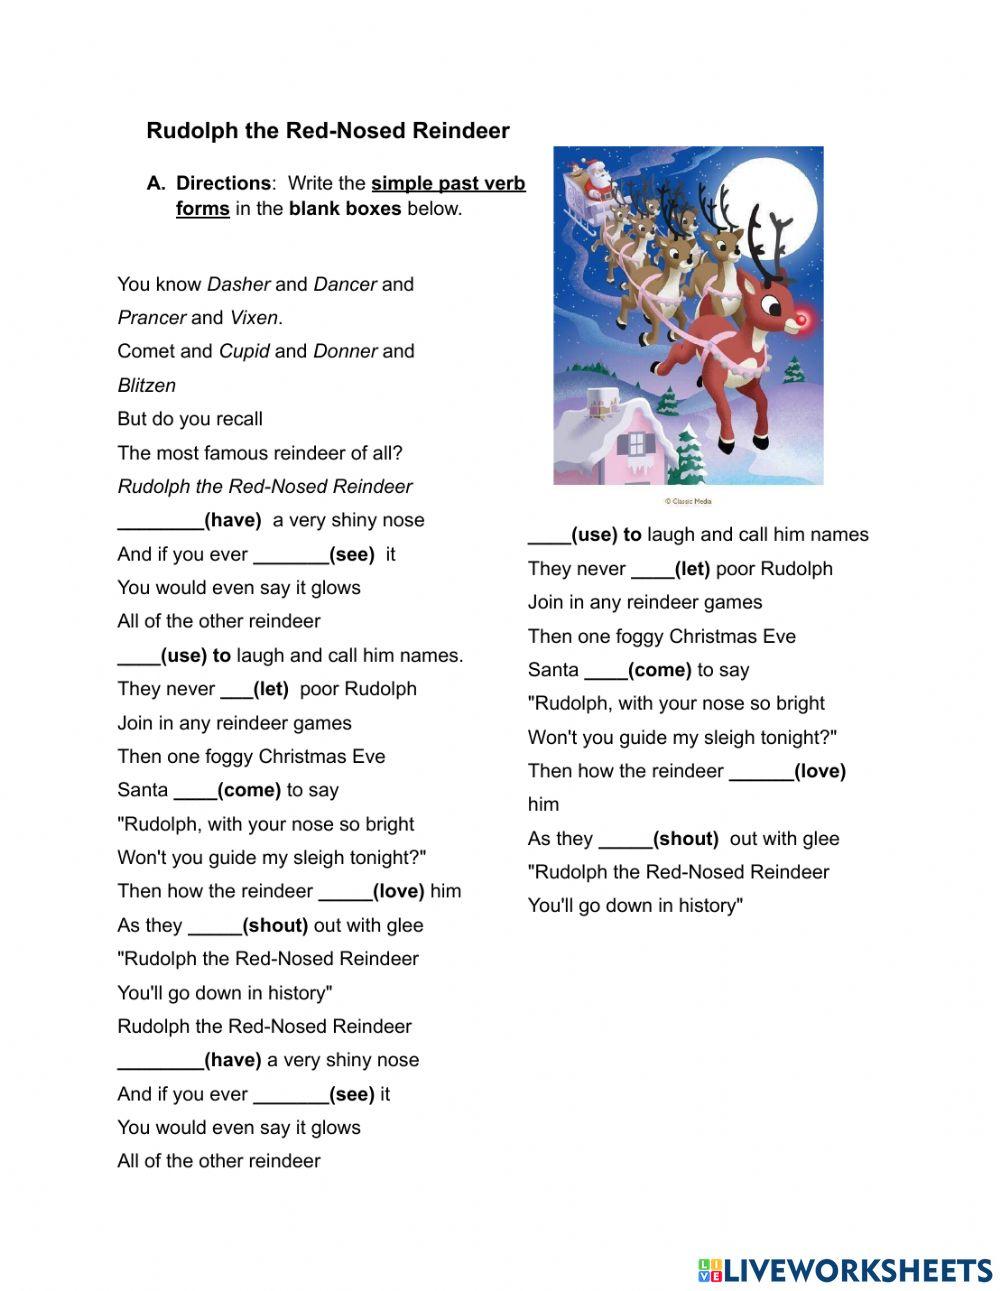 Rudolph the Red- Nosed Reindeer - Past Tense Song